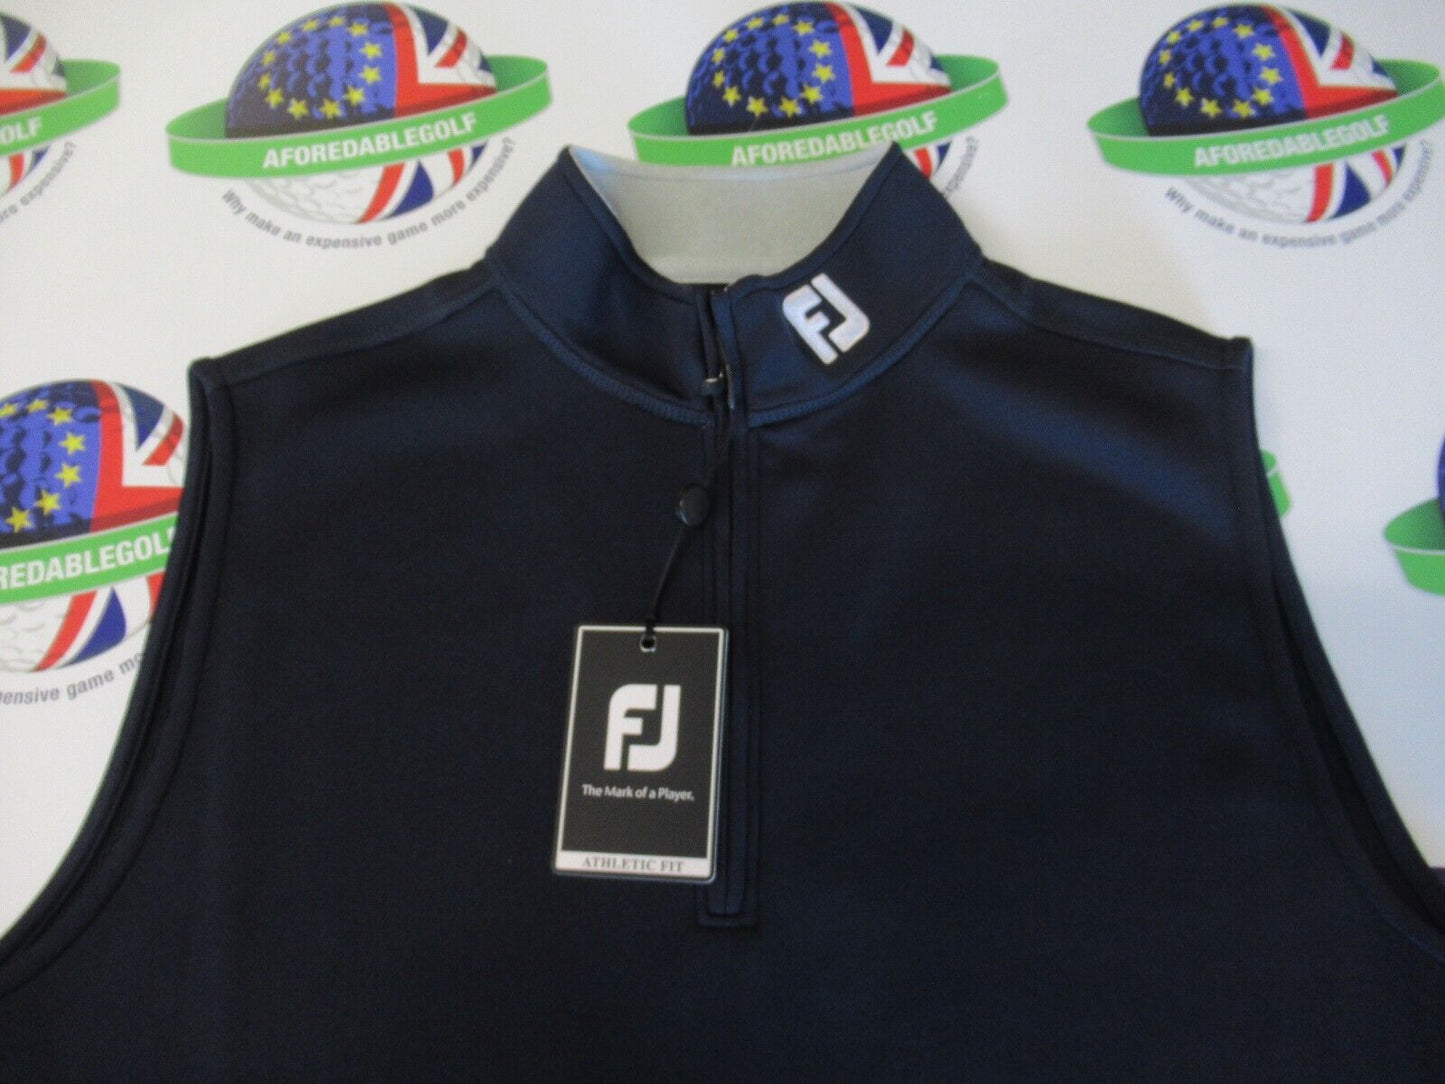 footjoy chill out 1/2 zip vest/gilet navy uk size small